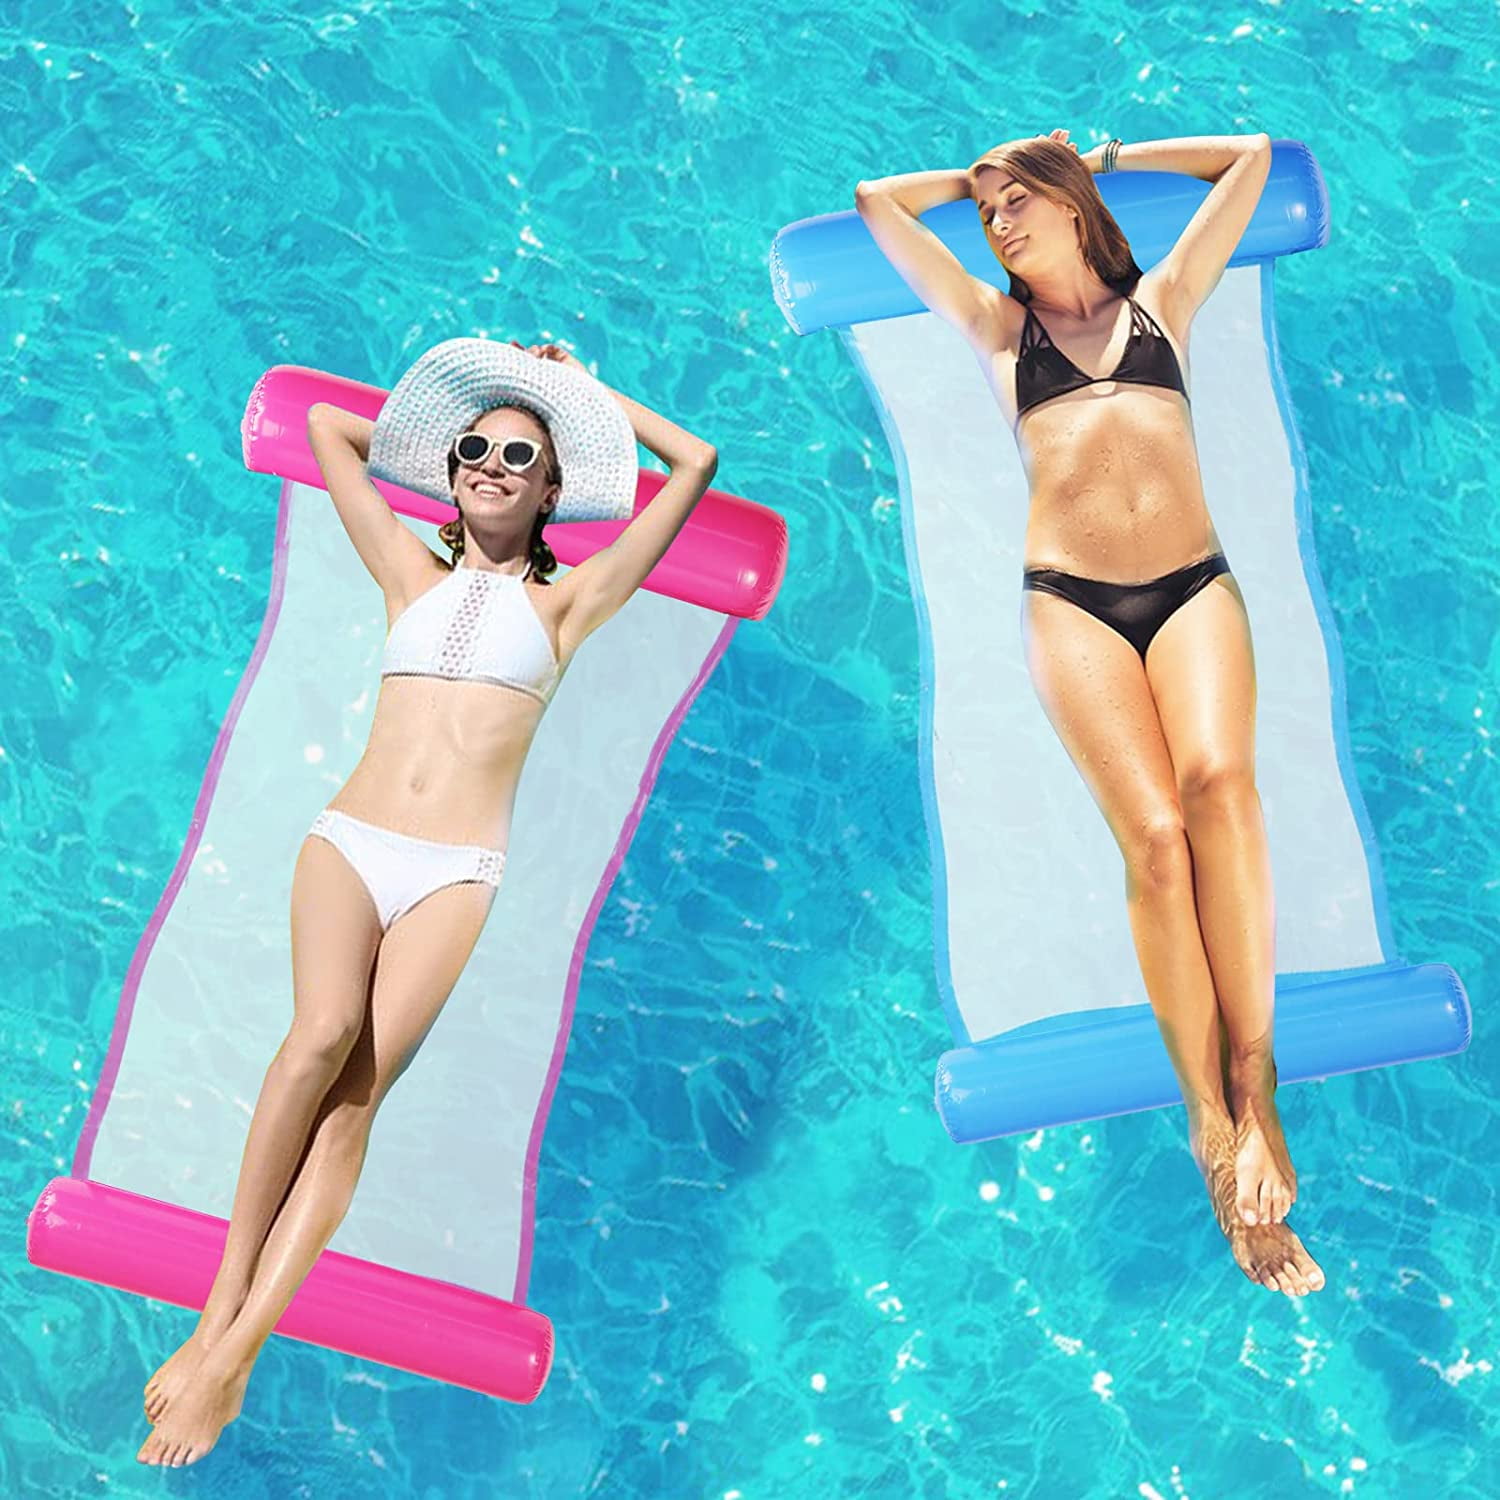 Originalsourcing 1 Pc Inflatable Floats Hammock, Inflatable Pool Rafts Swimming Hammock Pool Swimming Accessories for Adults Kids Outdoor Pool Beach Party -